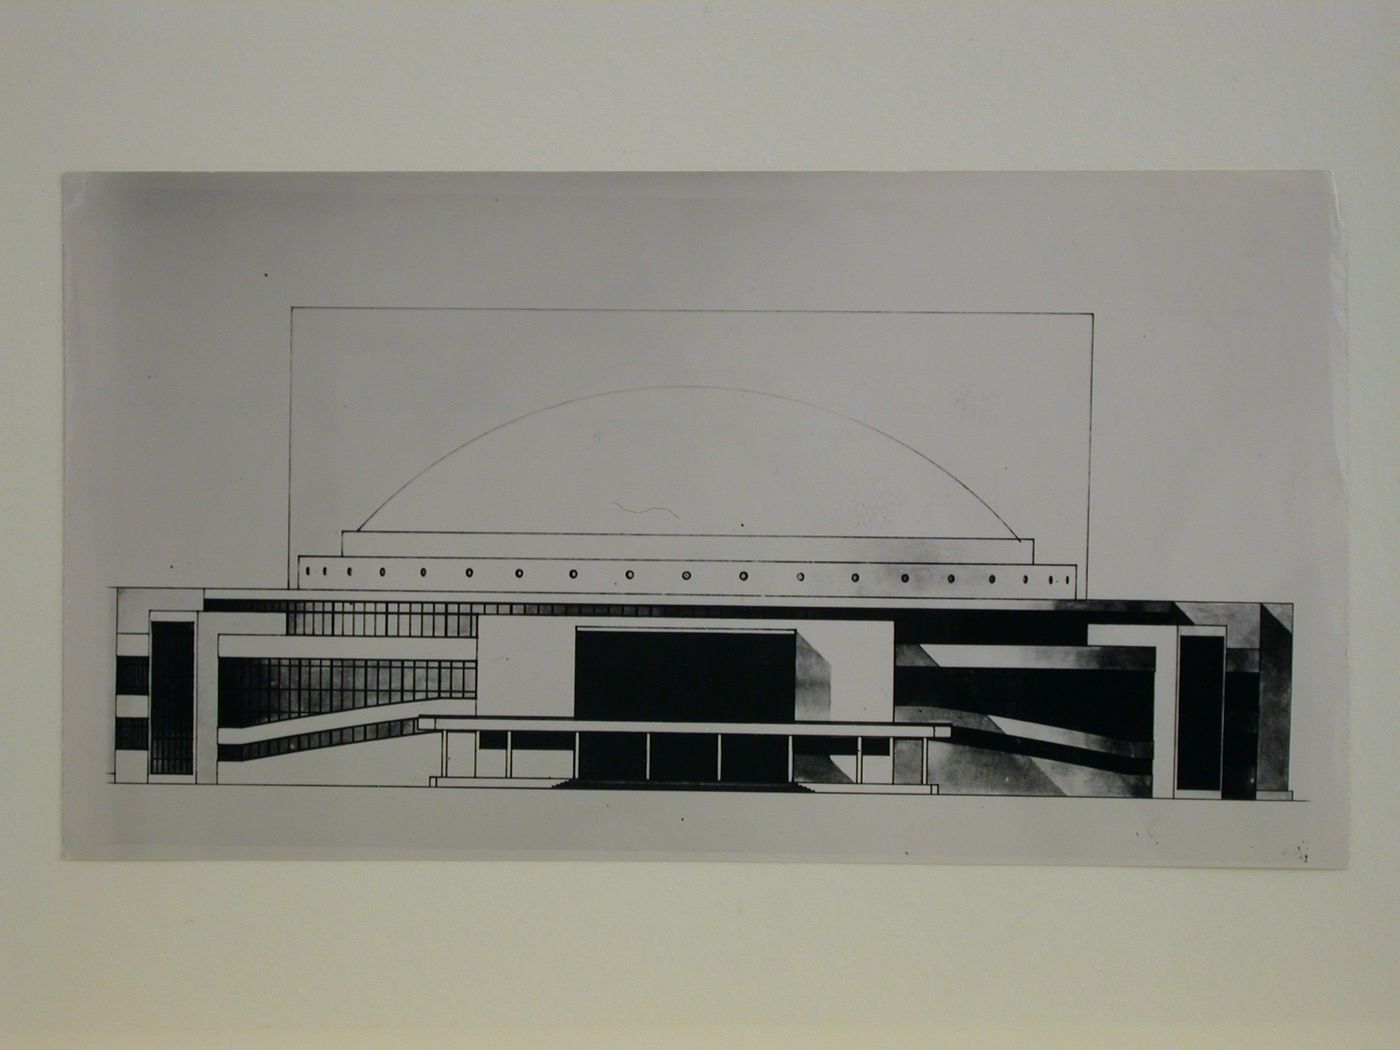 Photograph of an elevation for the ZIL Palace of Culture (club for the Likhachev Automobile Plant), Moscow